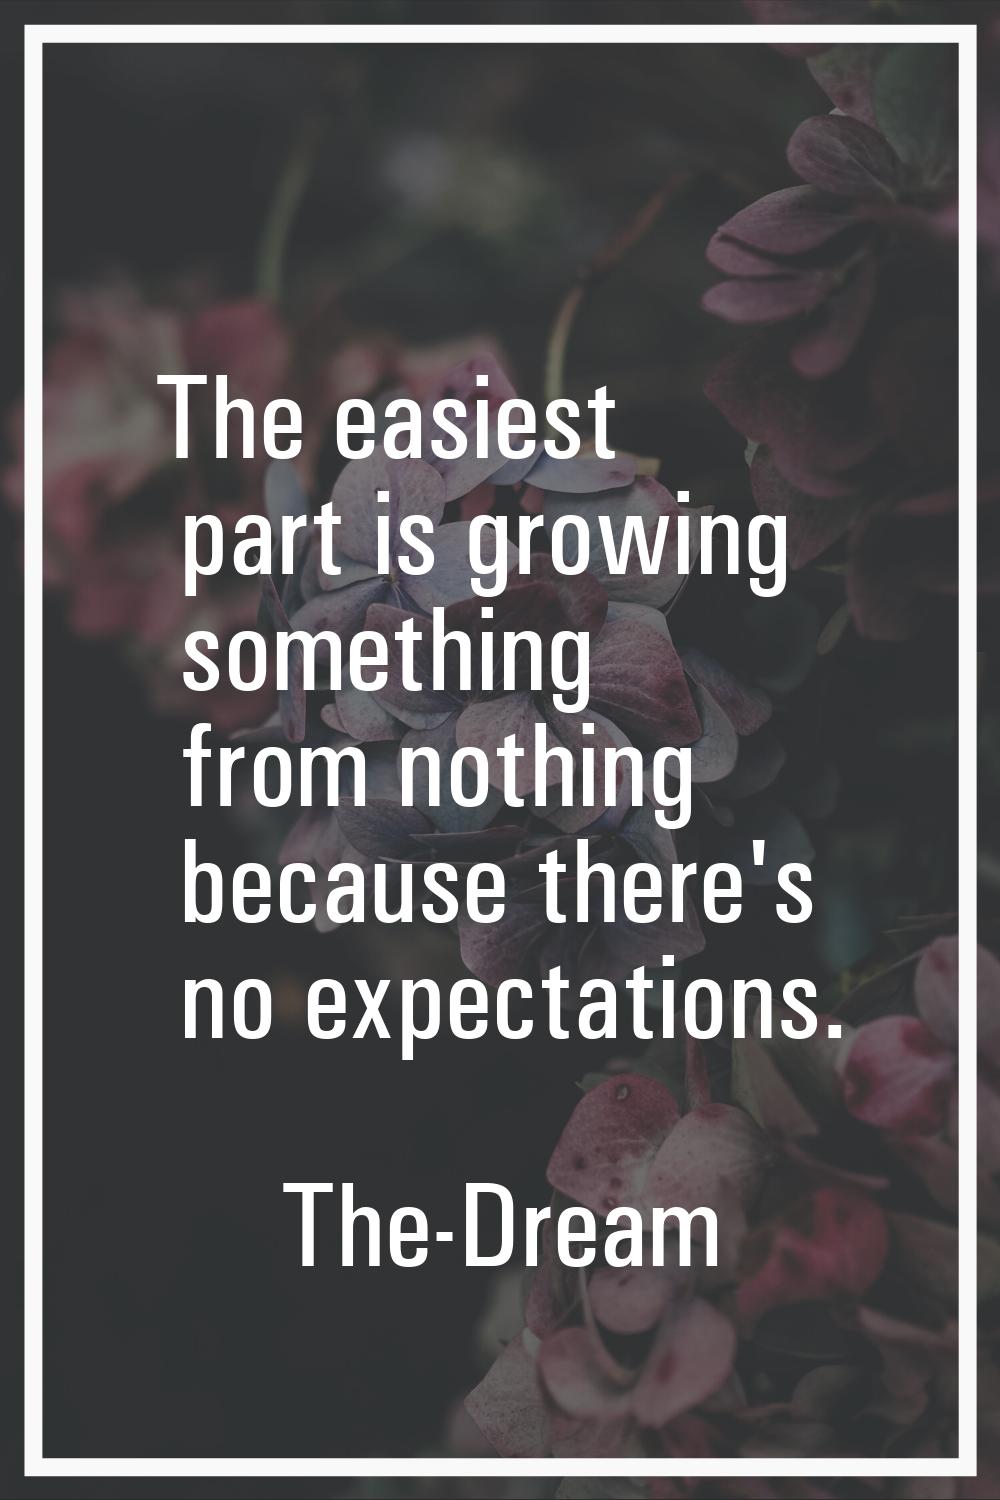 The easiest part is growing something from nothing because there's no expectations.